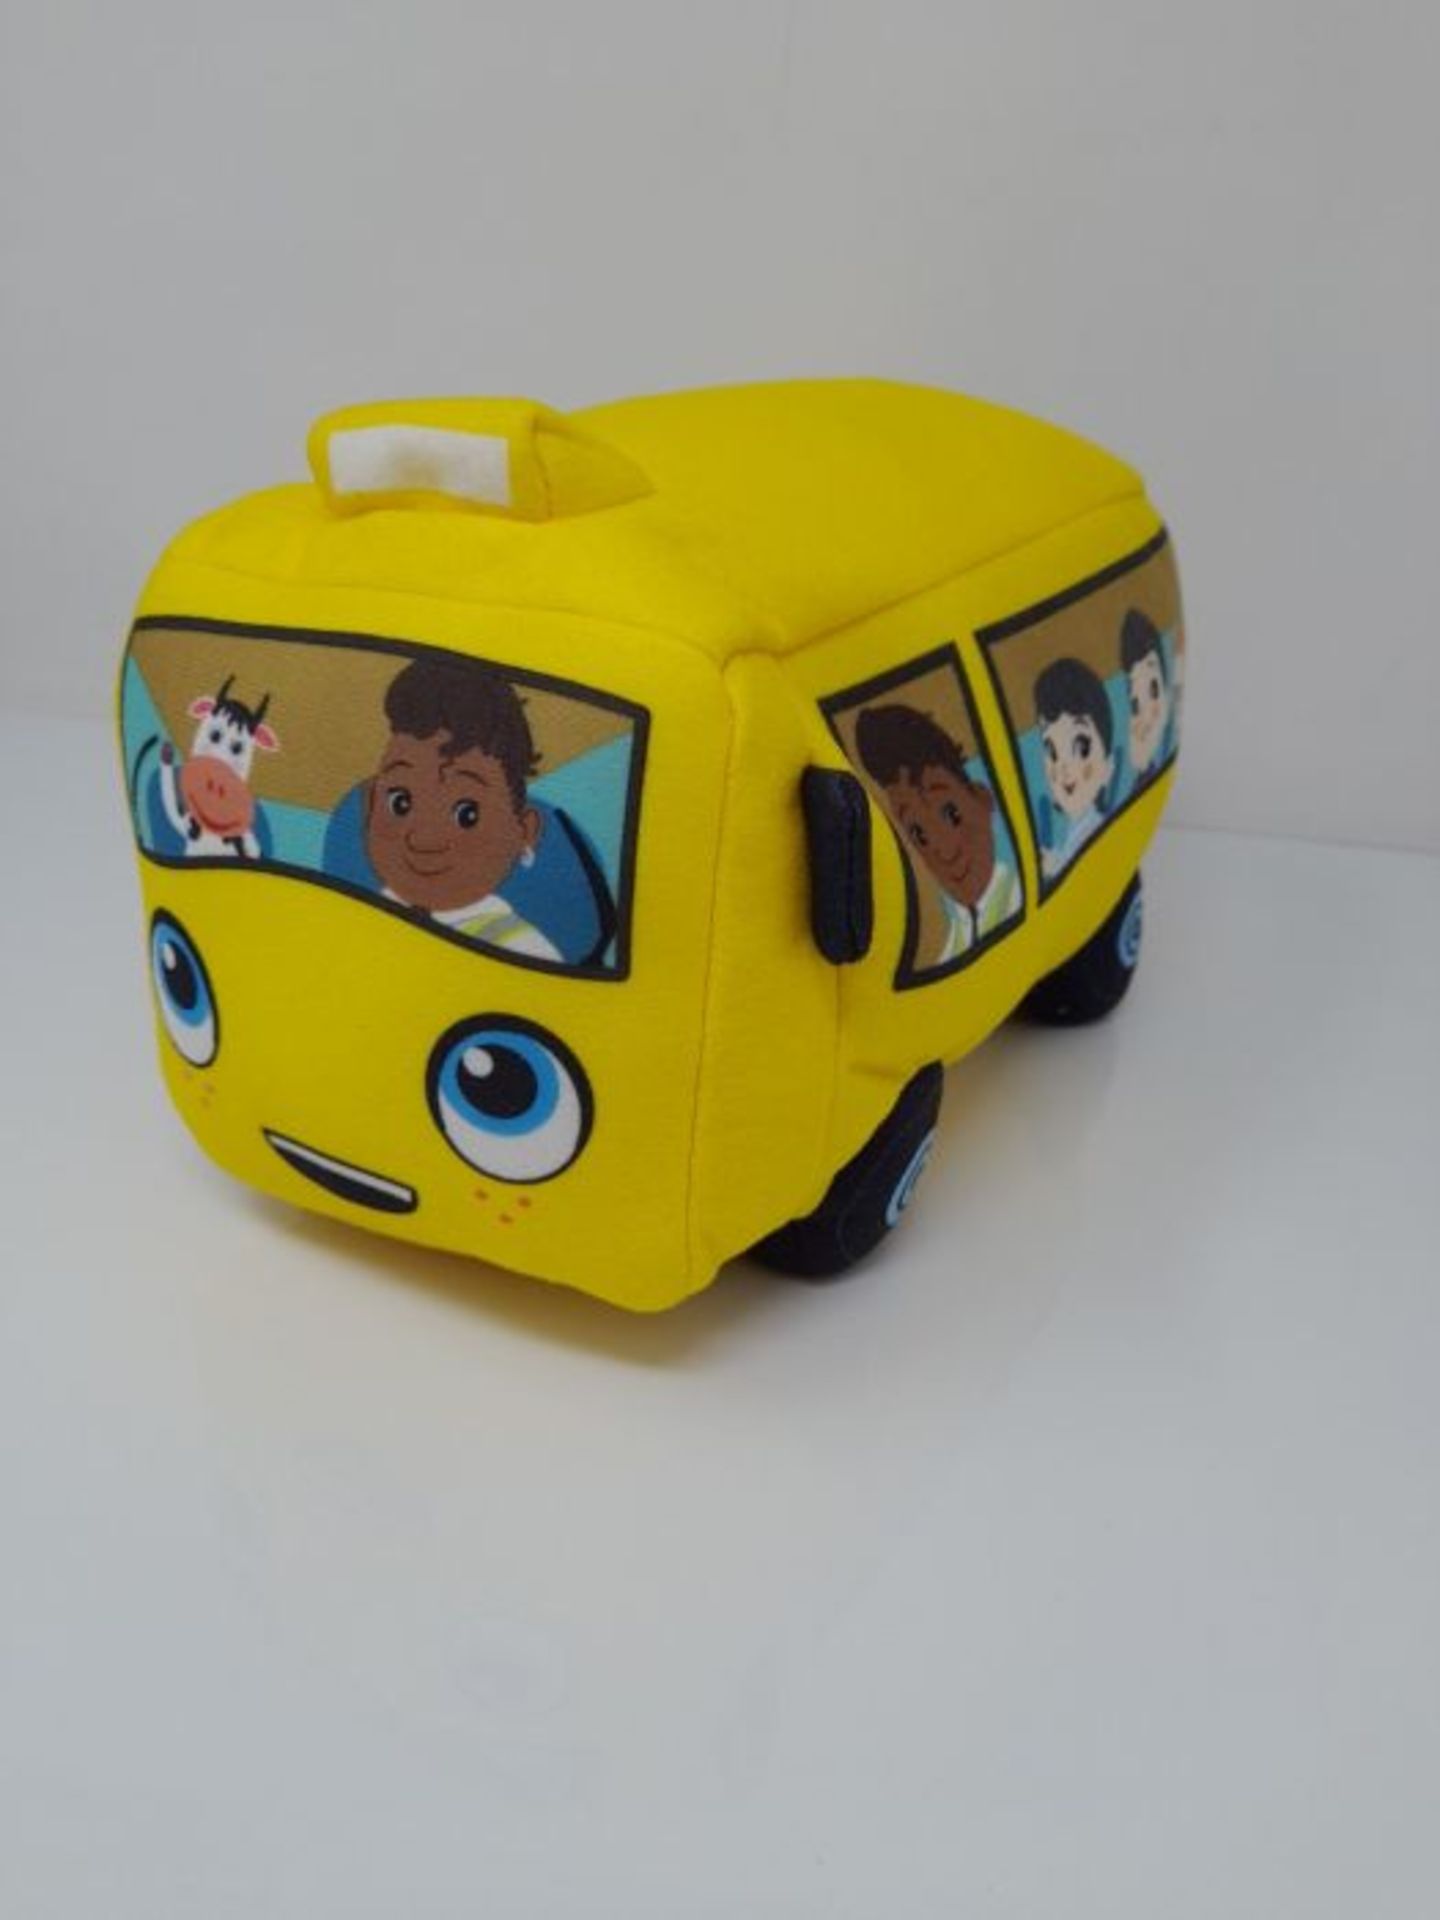 Little Baby Bum Little Tikes Wiggling Wheels on the Bus - Play & Learn - Interactive - - Image 2 of 2